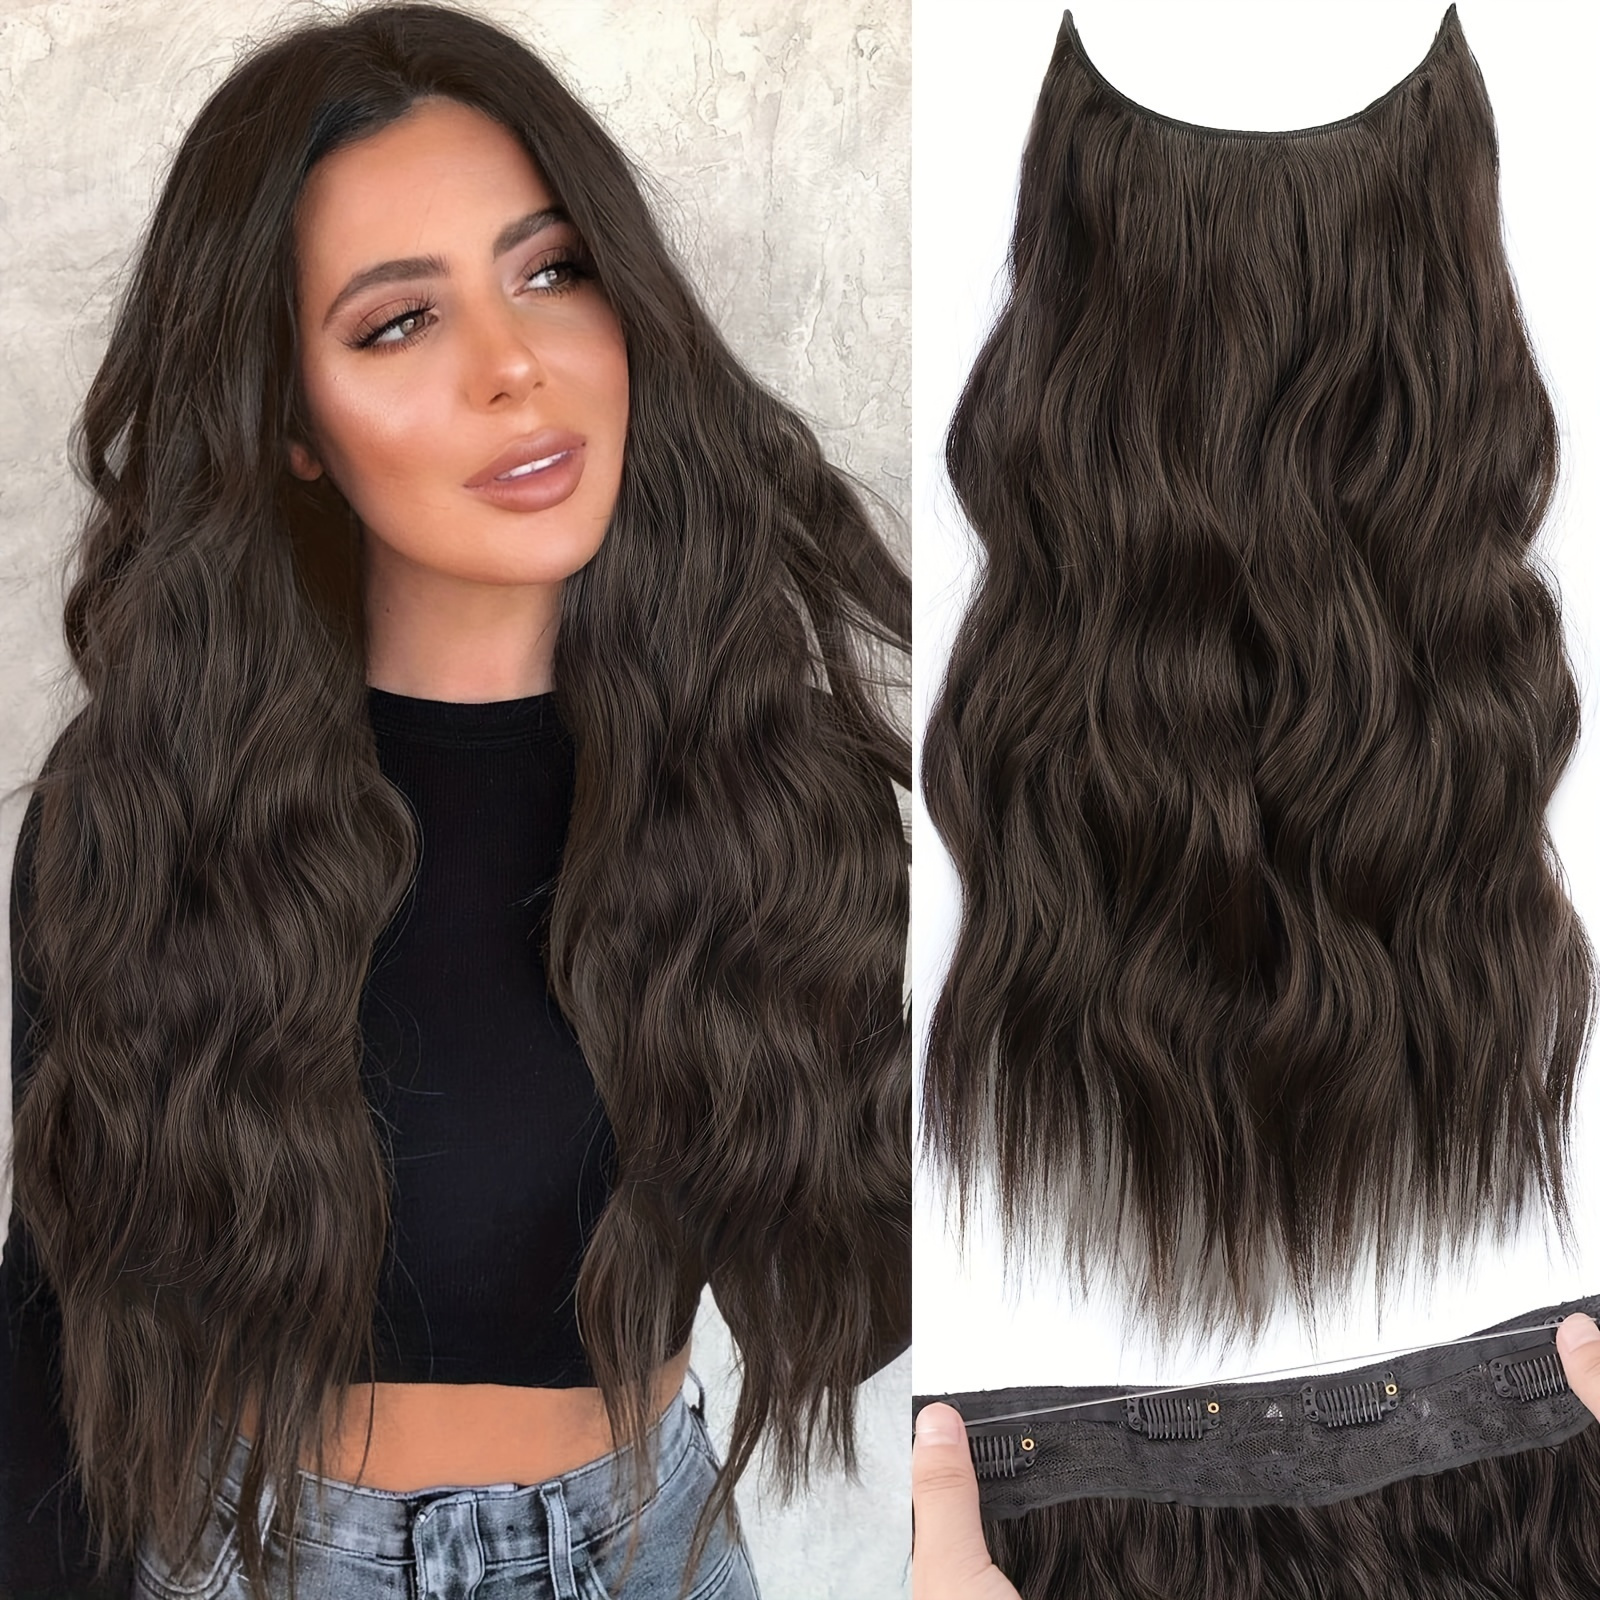 Water Wave Hair Piece Wig Orange-Brown Natural Looseness Increases Hair Volume Invisible Wire Secret Hairpieces with Secure Clips in Hair